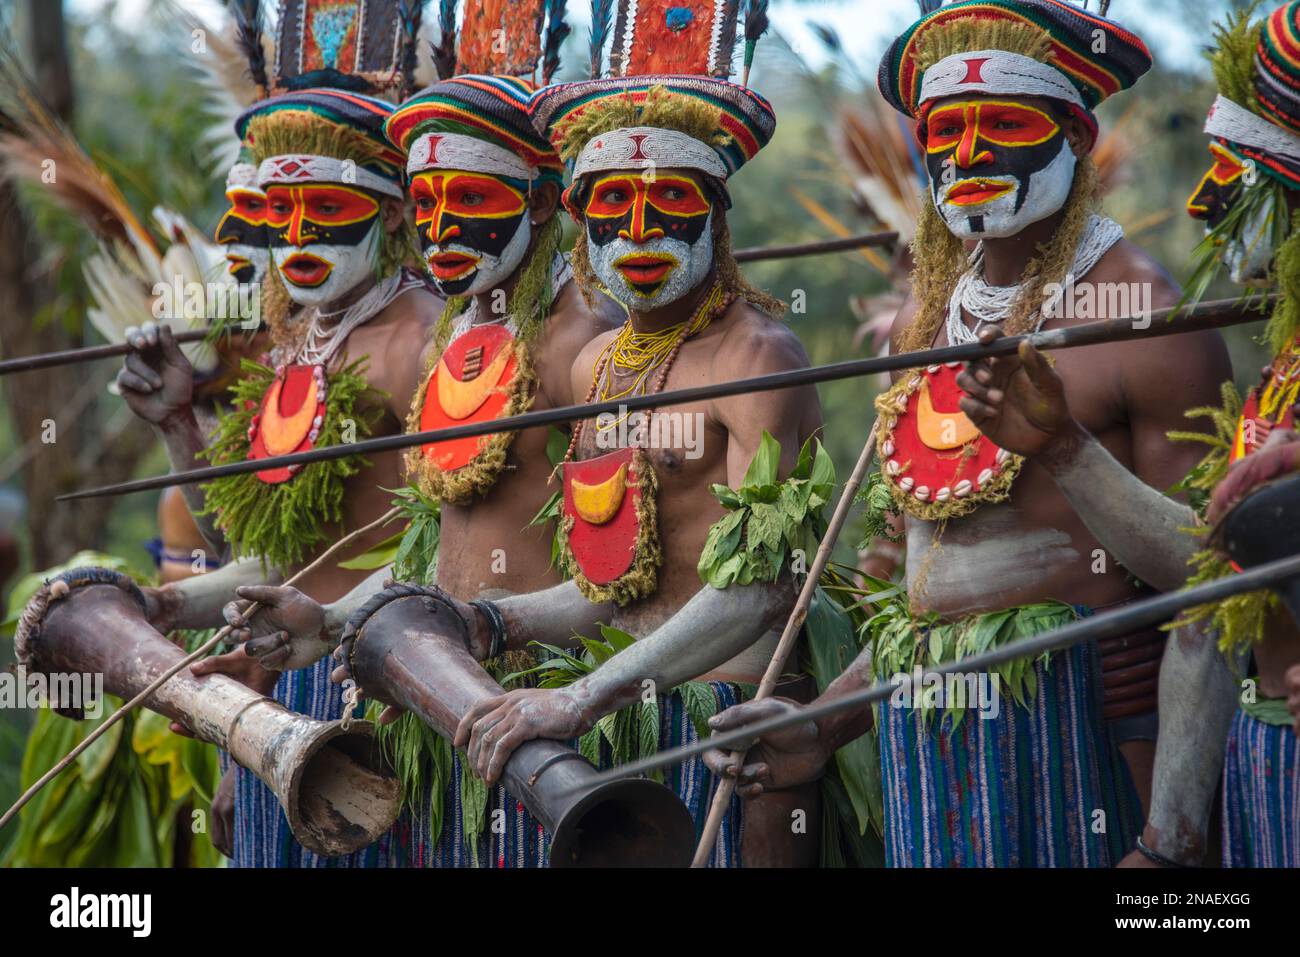 Participates from Pola village in a Sing Sing, a gathering of tribes or villages to show their distinct culture, dance, and music. This one is the vil Stock Photo